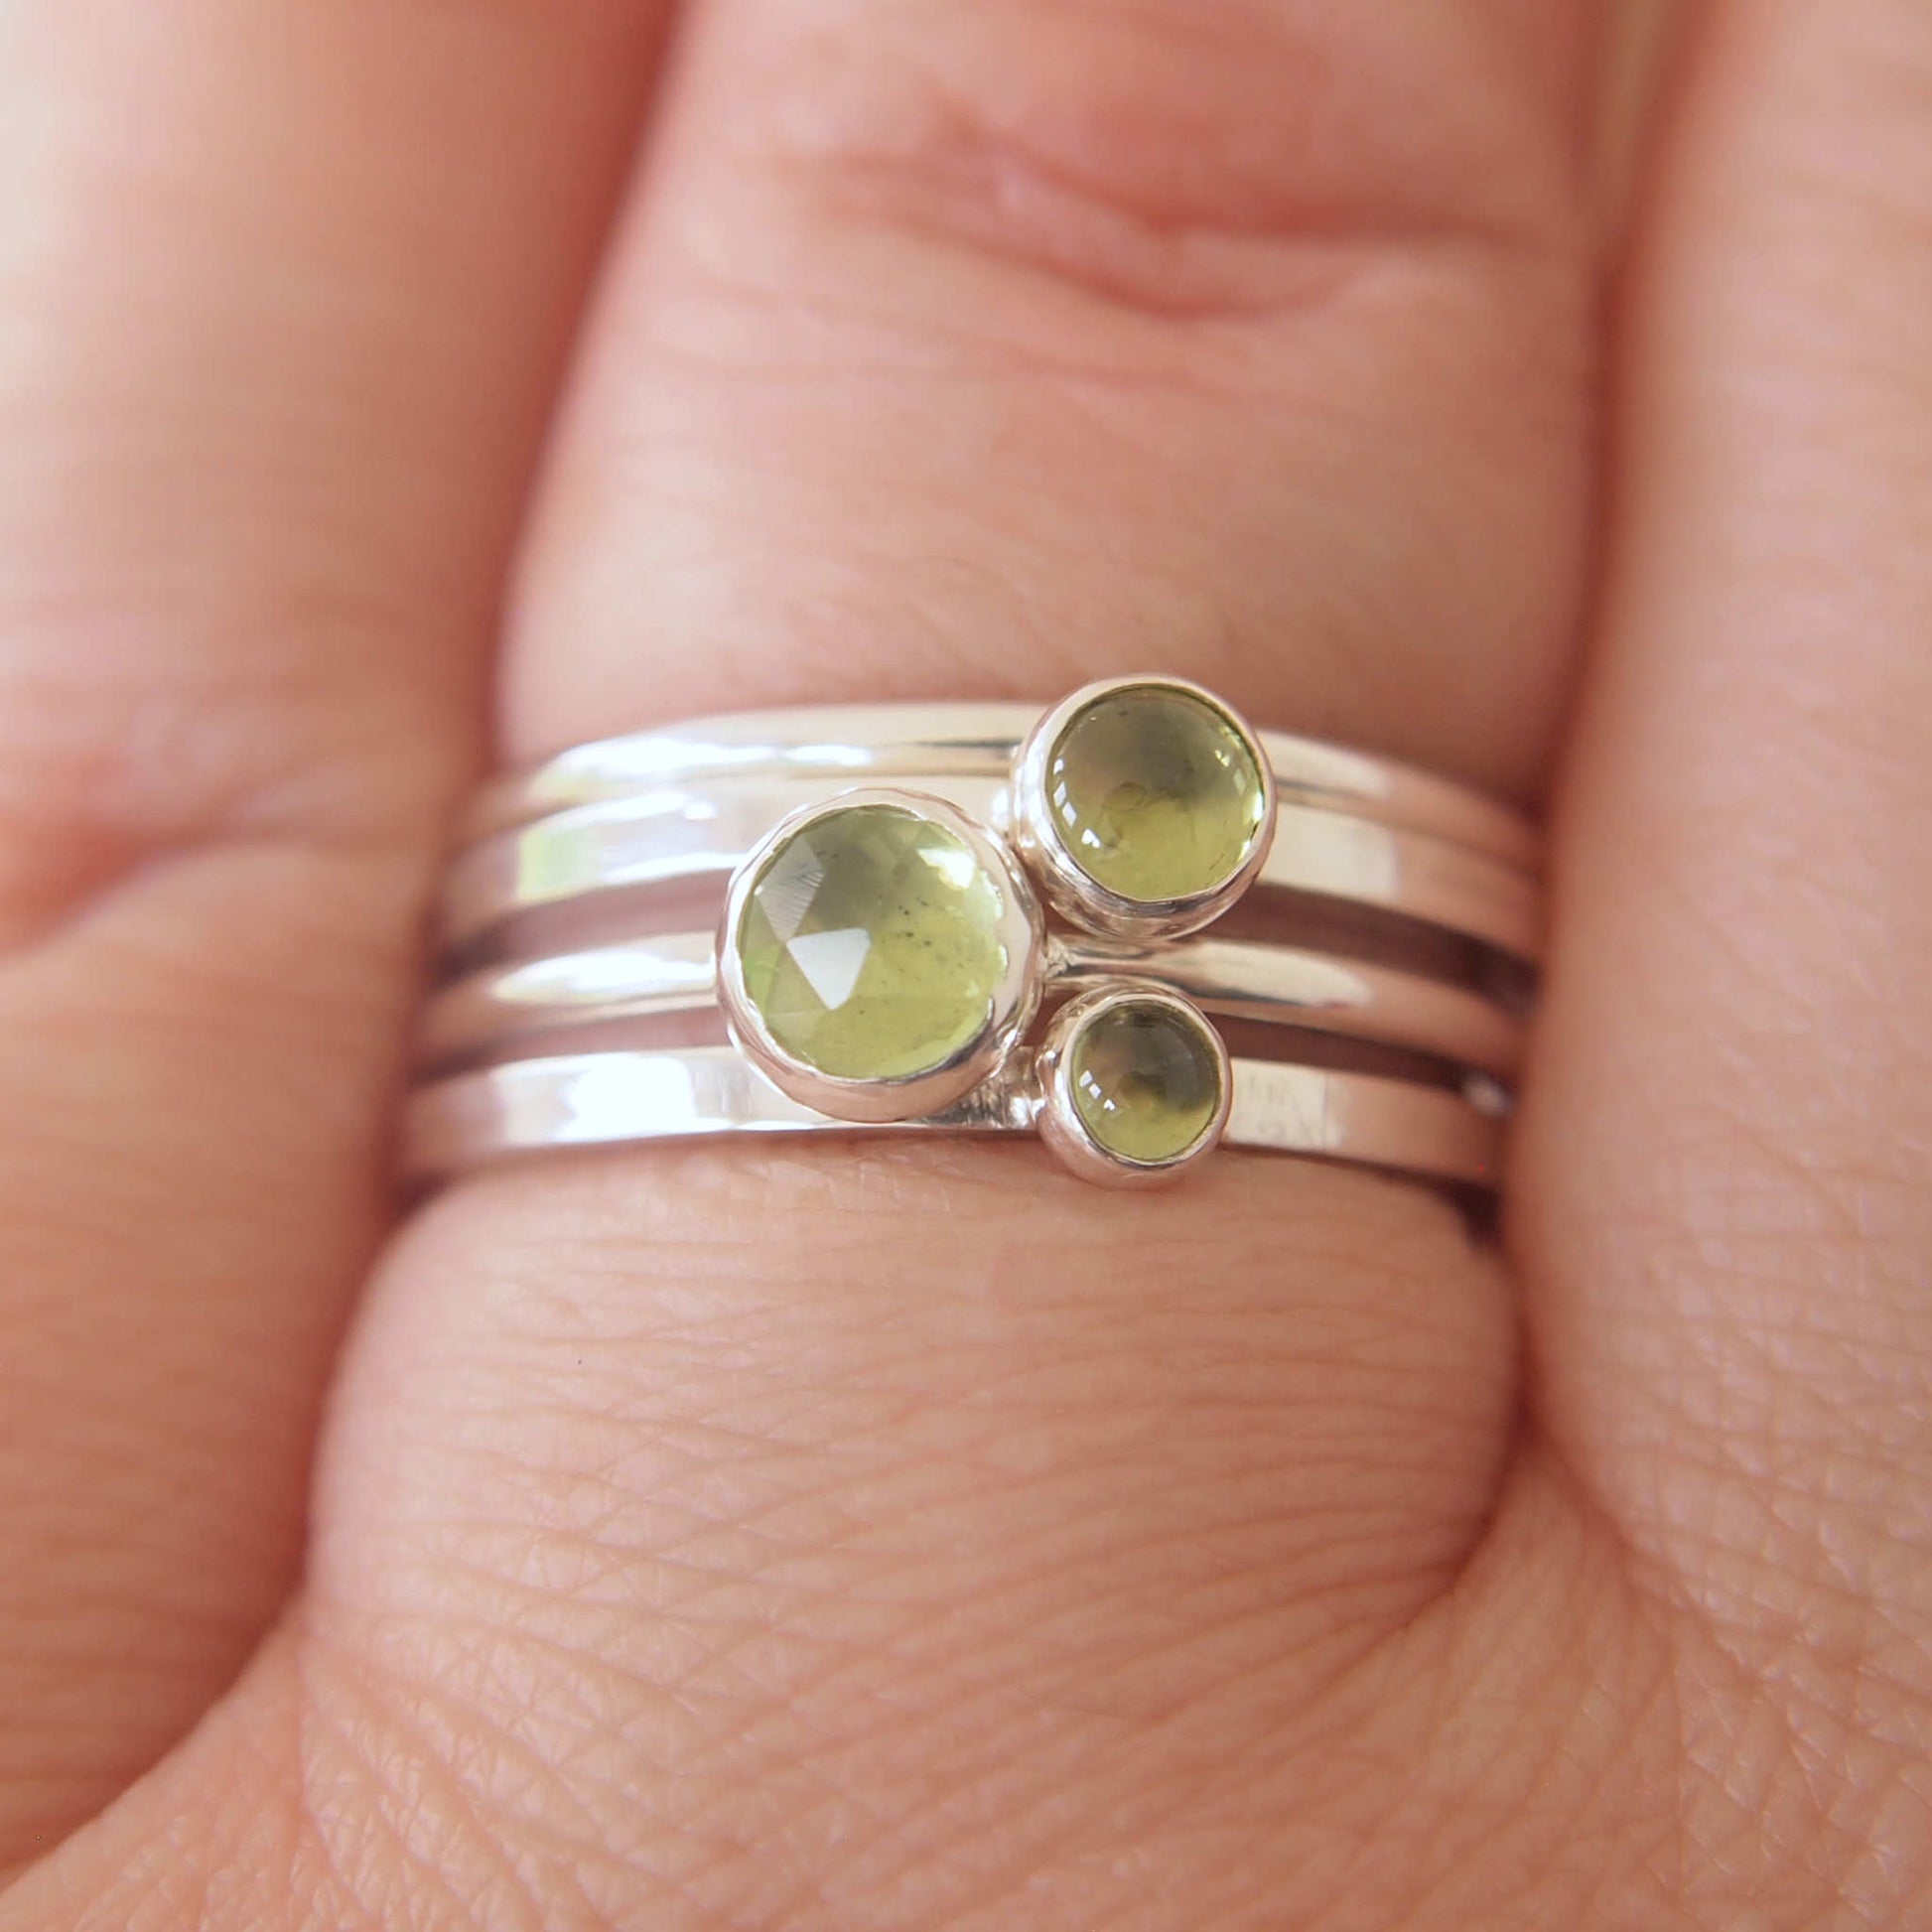 Three ring set in Sterling silver and different sizes of round Peridot, ranging in size from 3mm to 5mm. The rings are simple and minimalist in style. Handmade Jewellery from UK